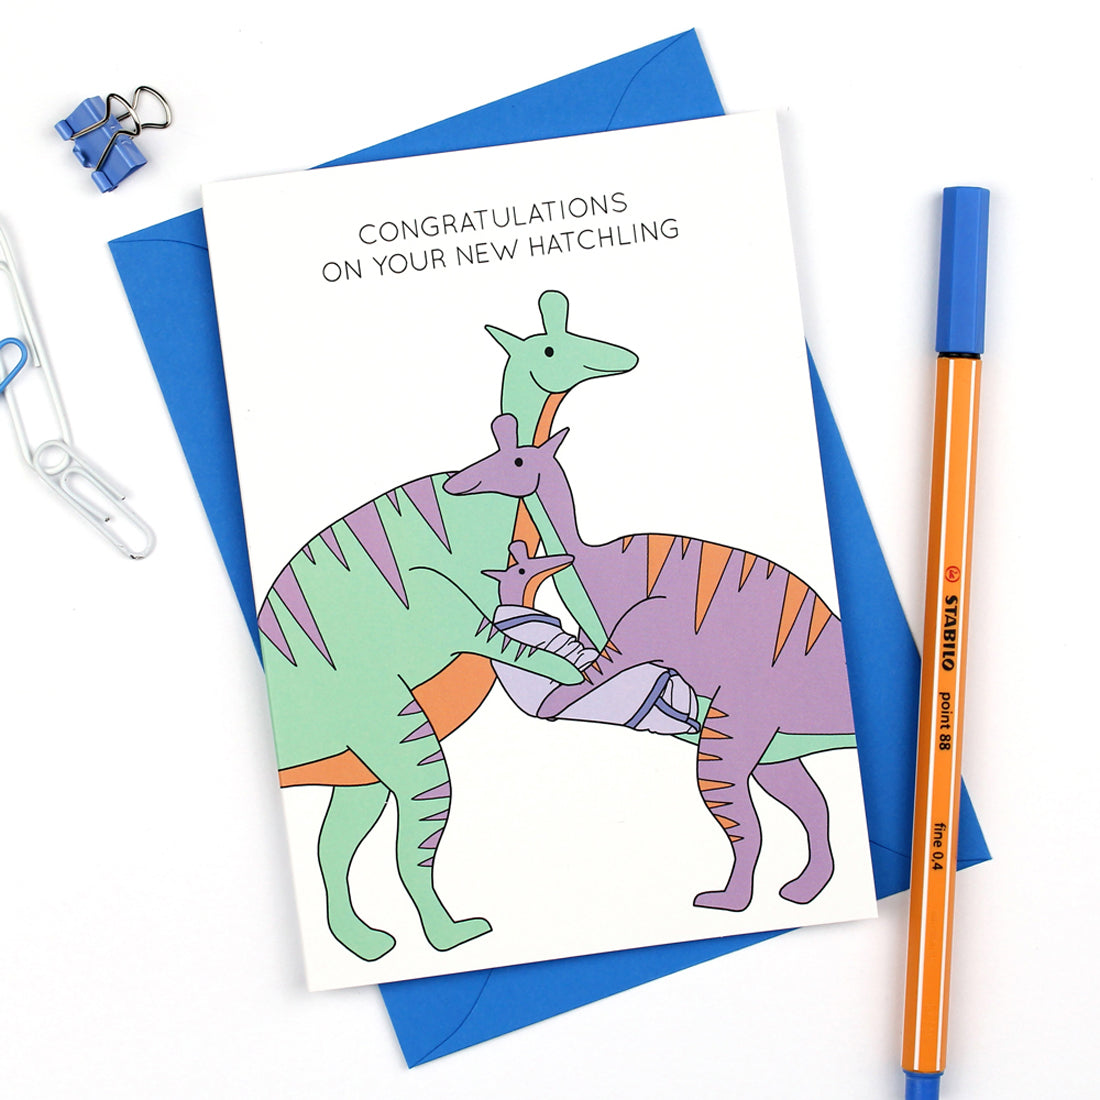 Congratulations on Your New Hatchling Greeting Card with blue envelope